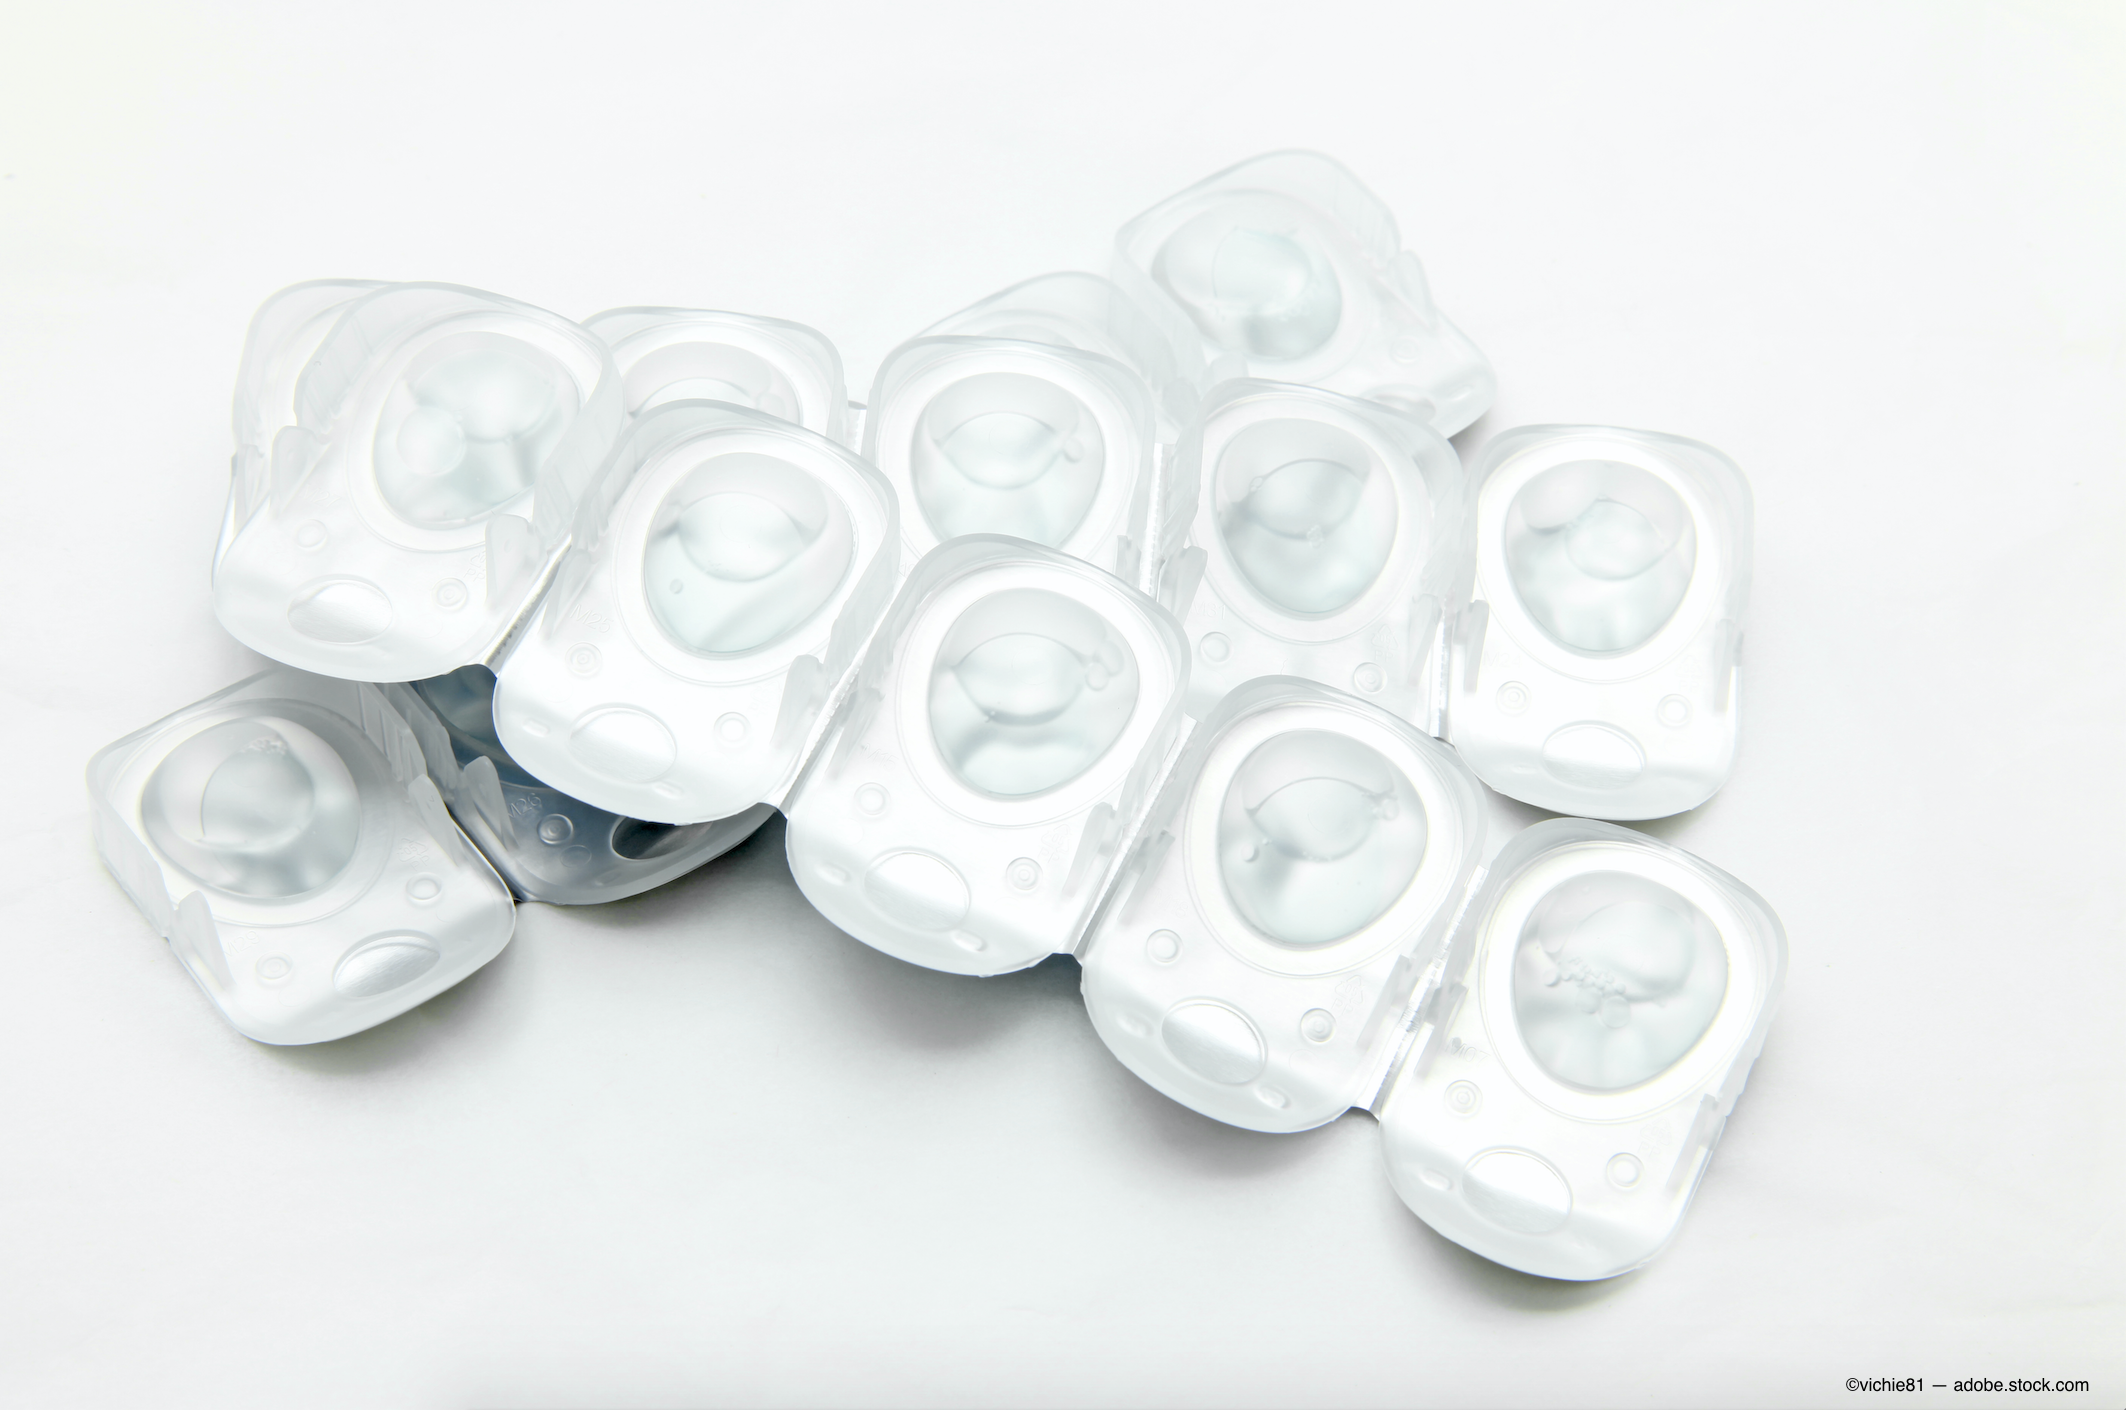 Silicone hydrogel daily disposable lenses match hydrogel for comfort